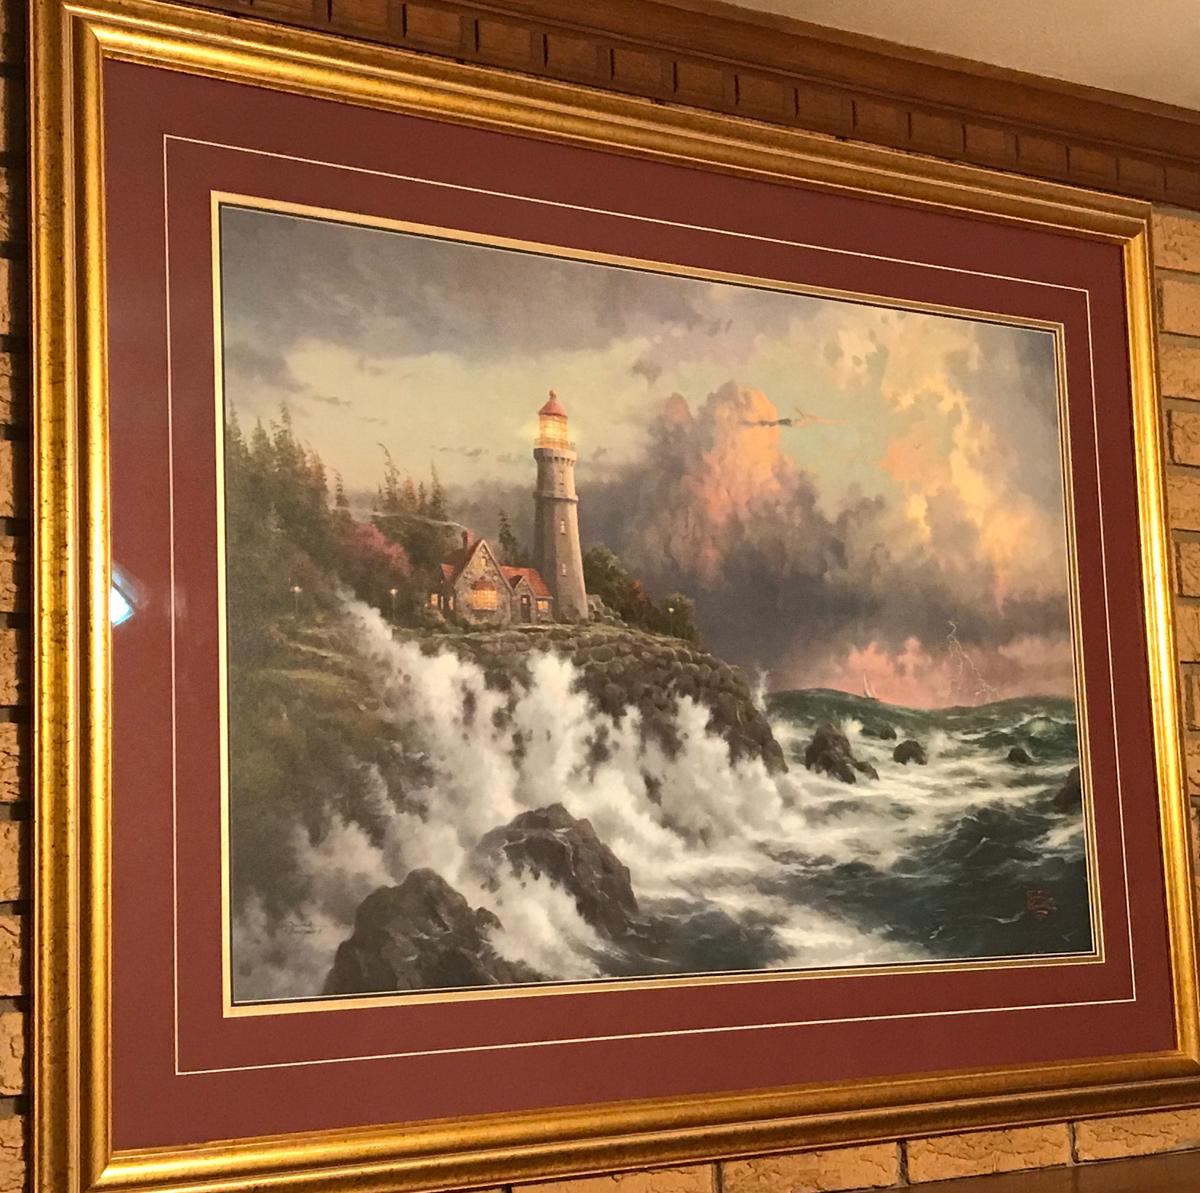 Impressive Thomas Kinkade "Conquering the Storms" – Limited Edition Gilt Framed & Matted Print